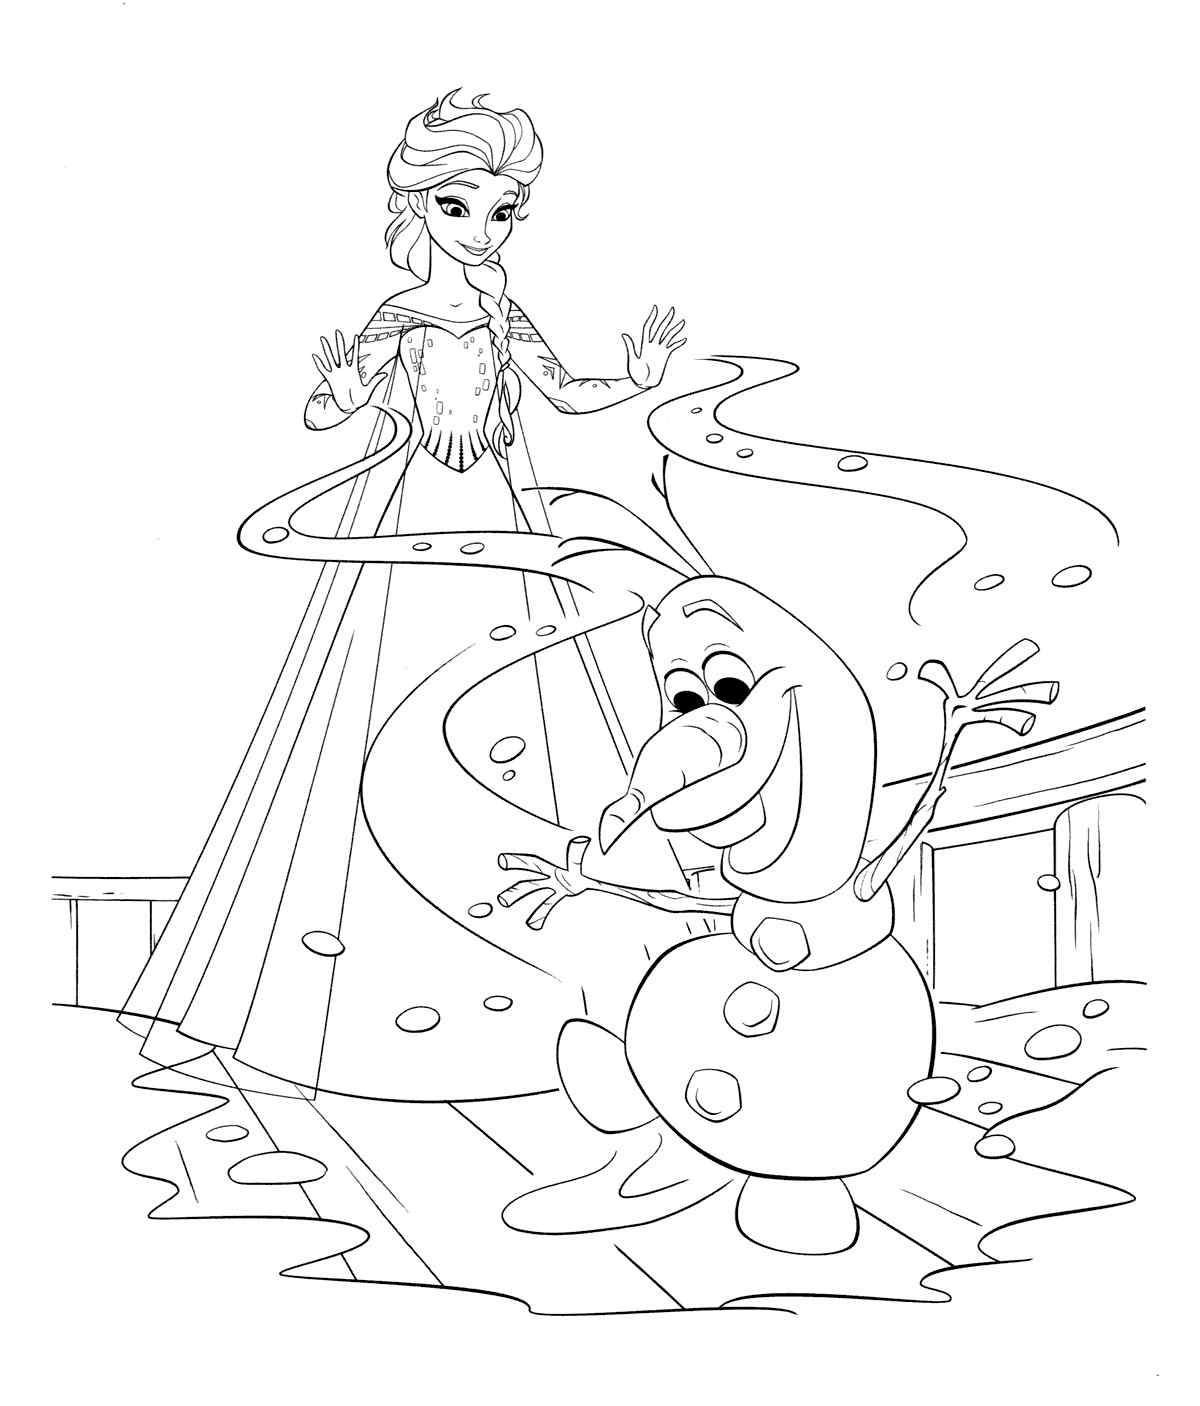 Let’s Arrange A Holiday Coloring Page